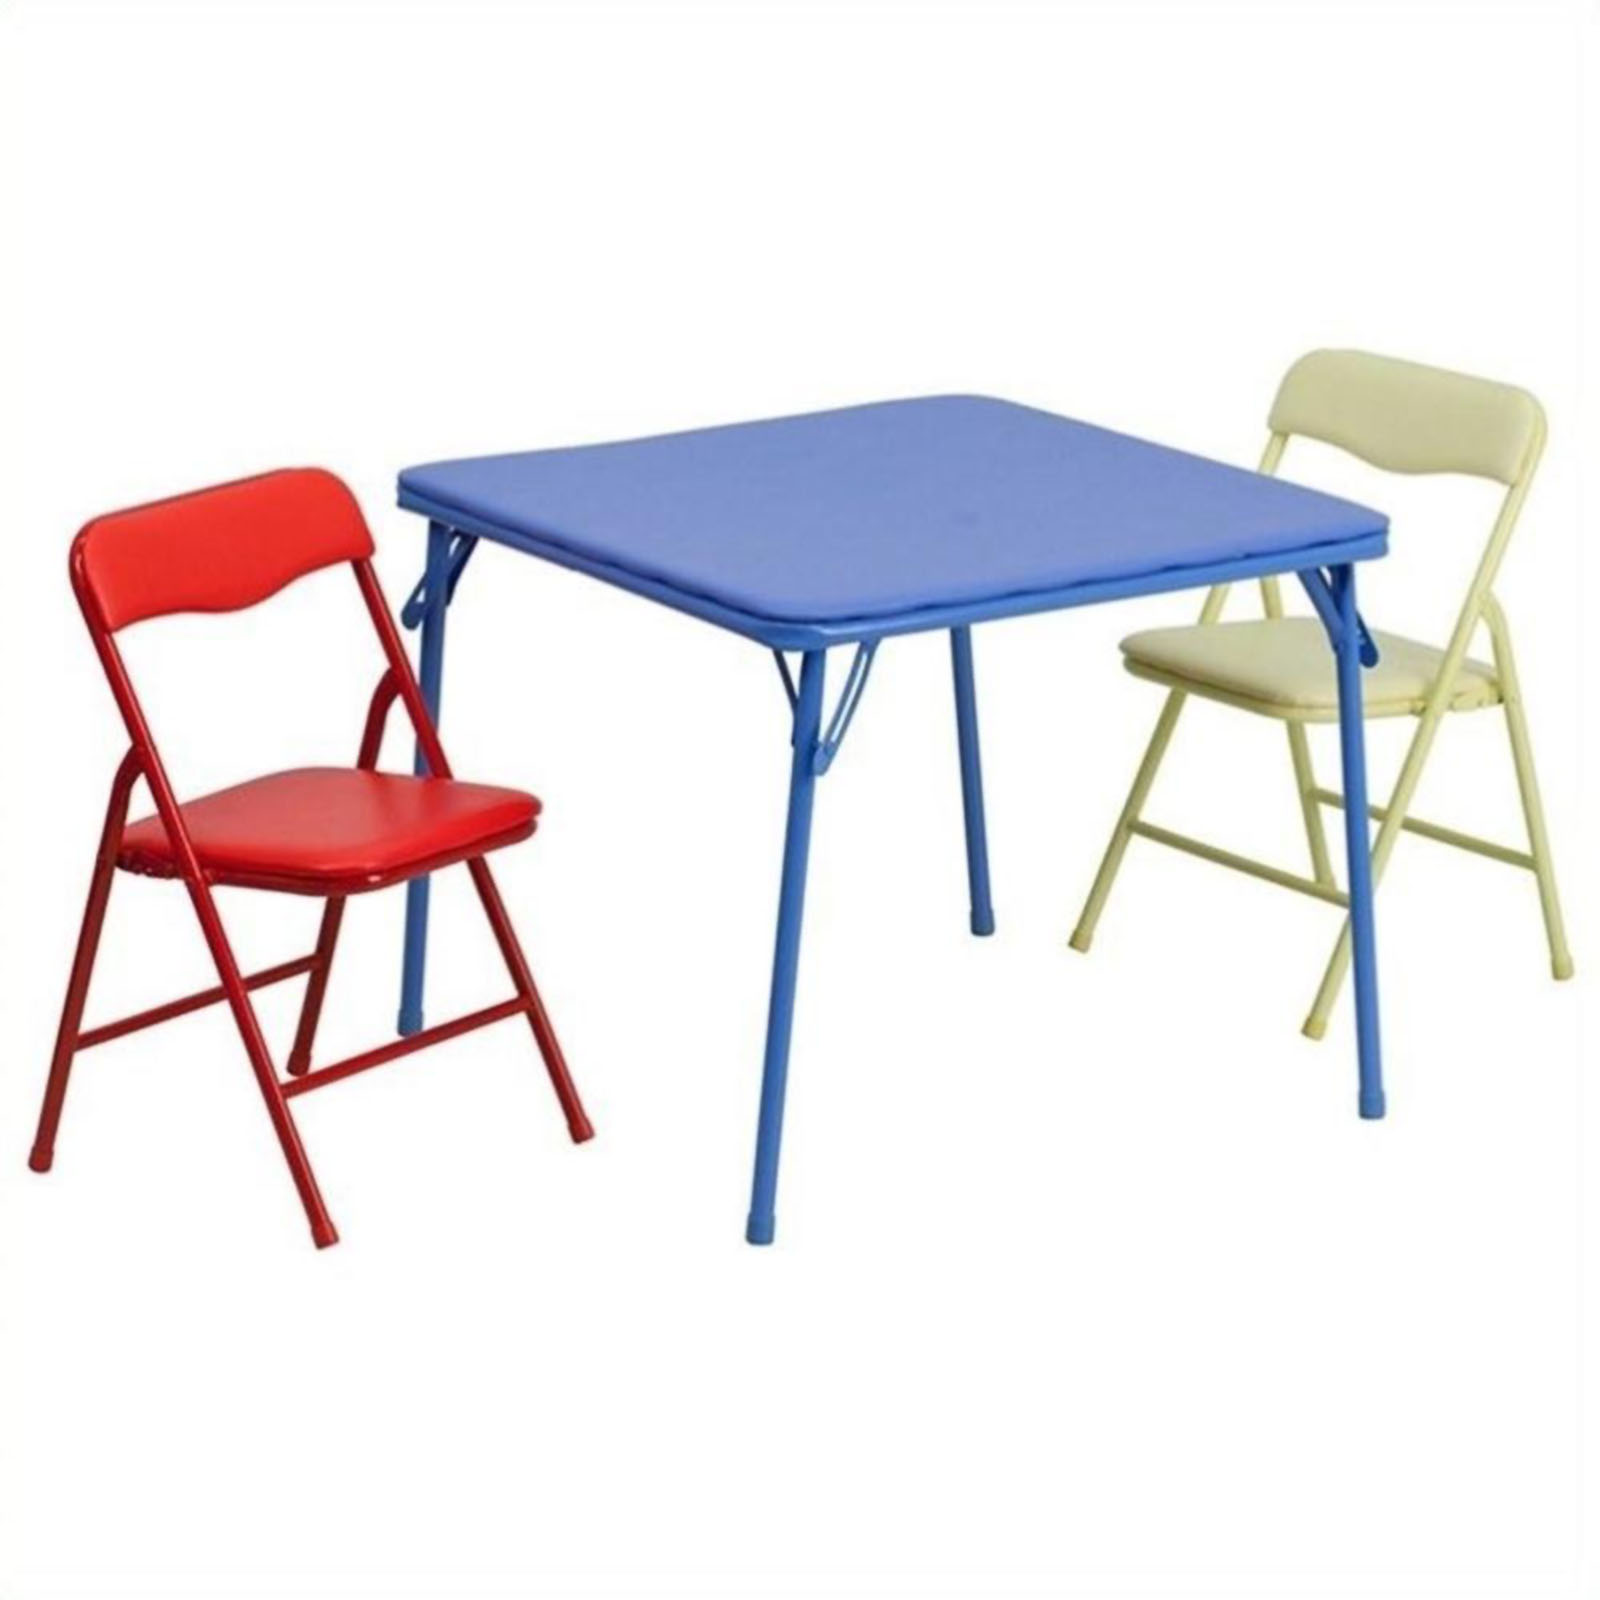 Lancaster Home 3pc Kids Folding Table And Chair Set Sears Marketplace